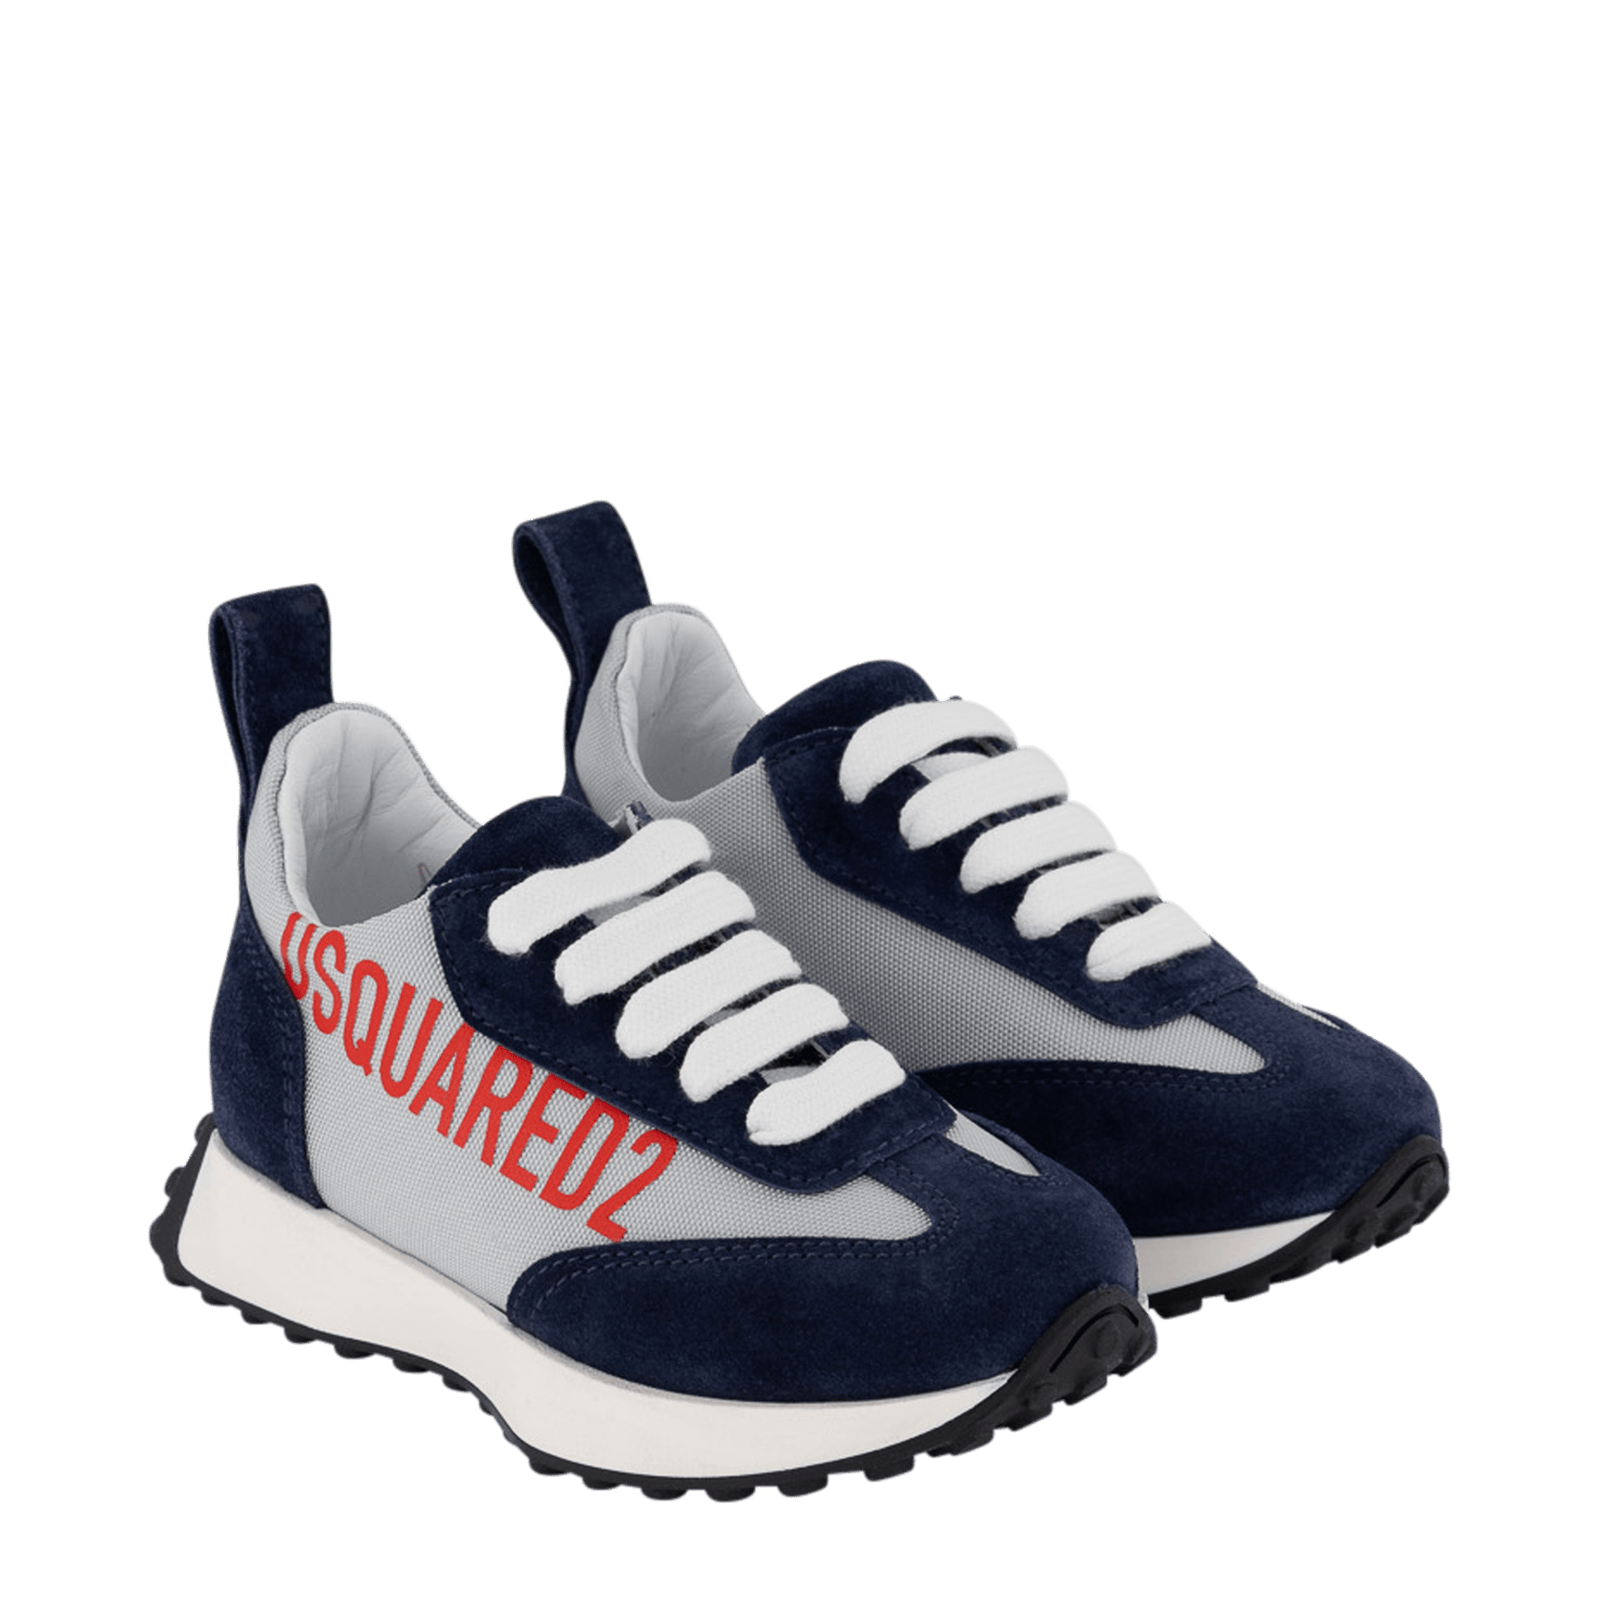 Dsquared2 Kinder Unisex Sneakers Navy 20